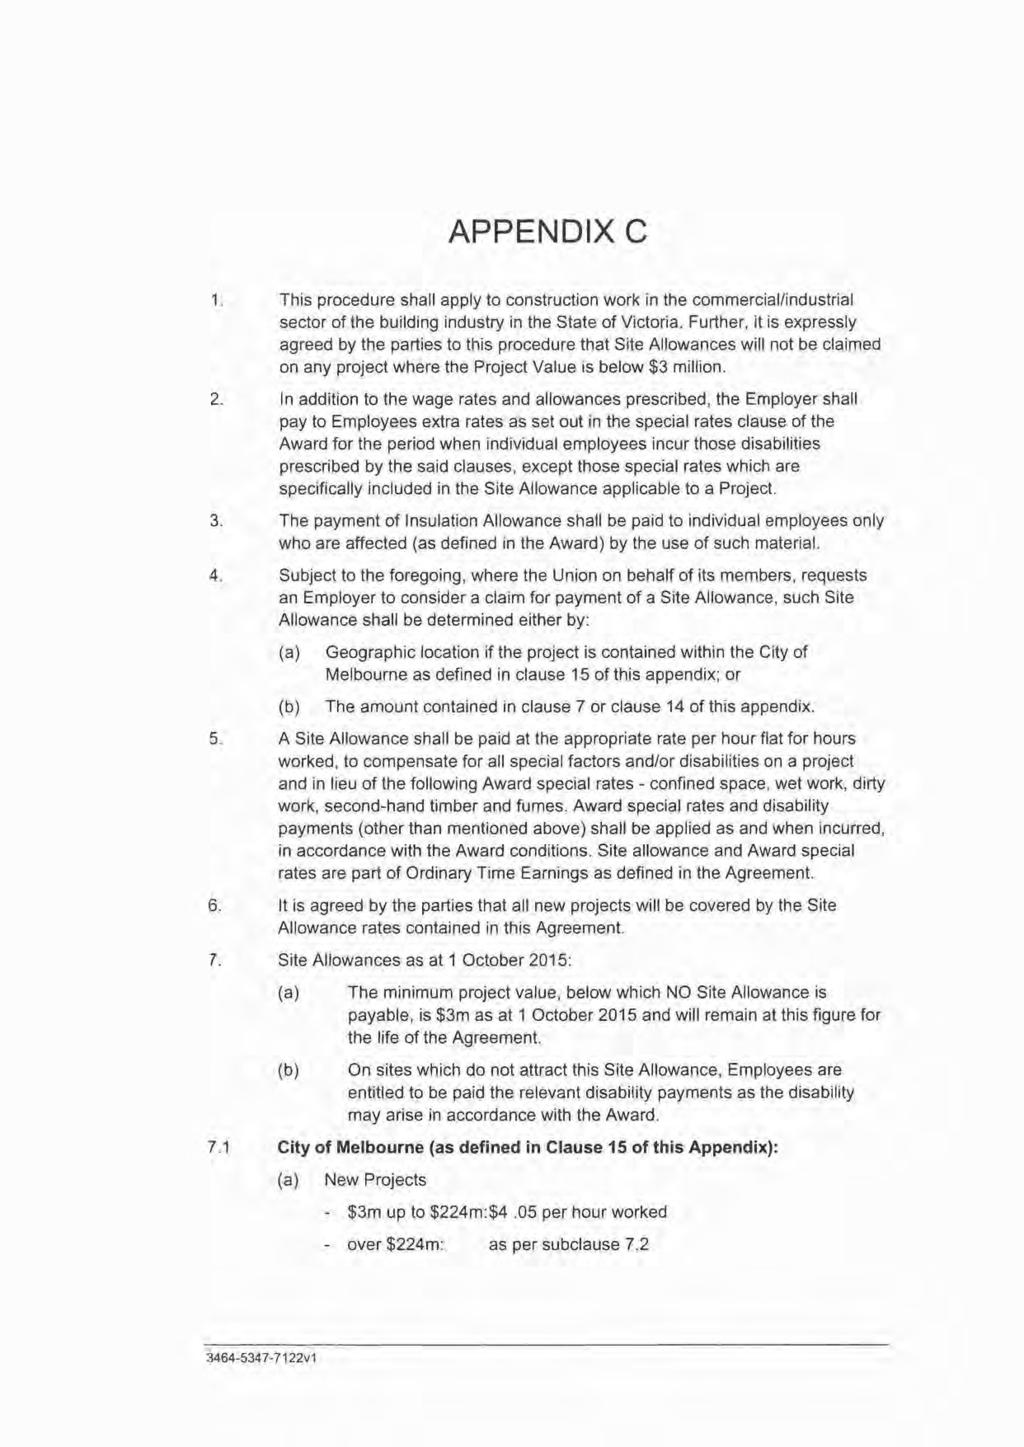 APPENDIX C 1. This procedure shall apply to construction work in the commercial/industrial sector of the building industry in the State of Victoria.